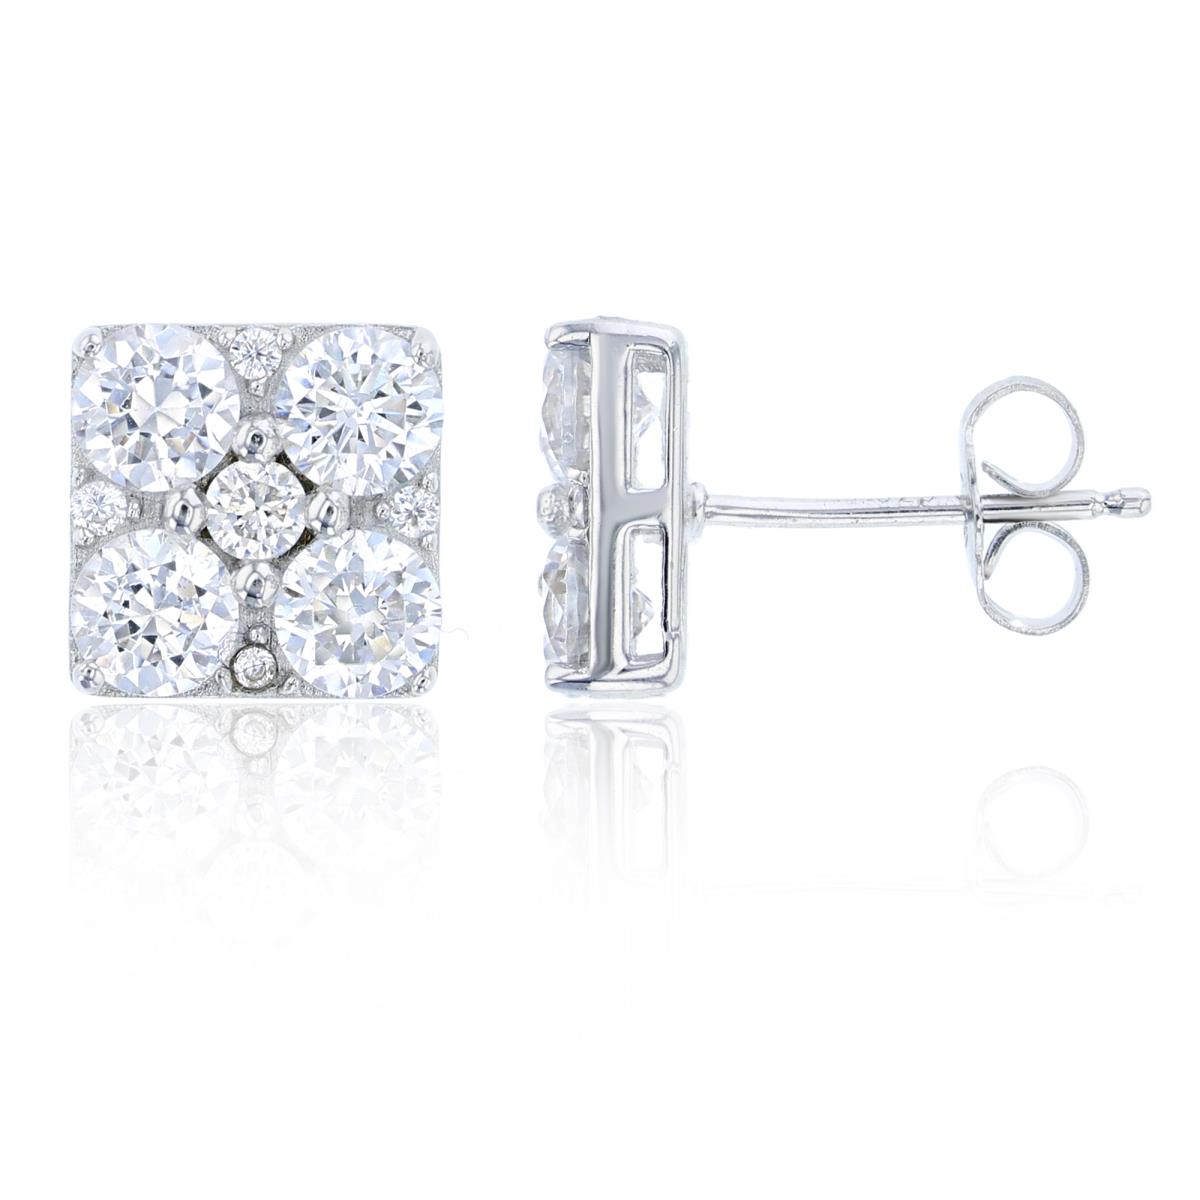 Sterling Silver Rhodium Pave Square Tile Stud Earring